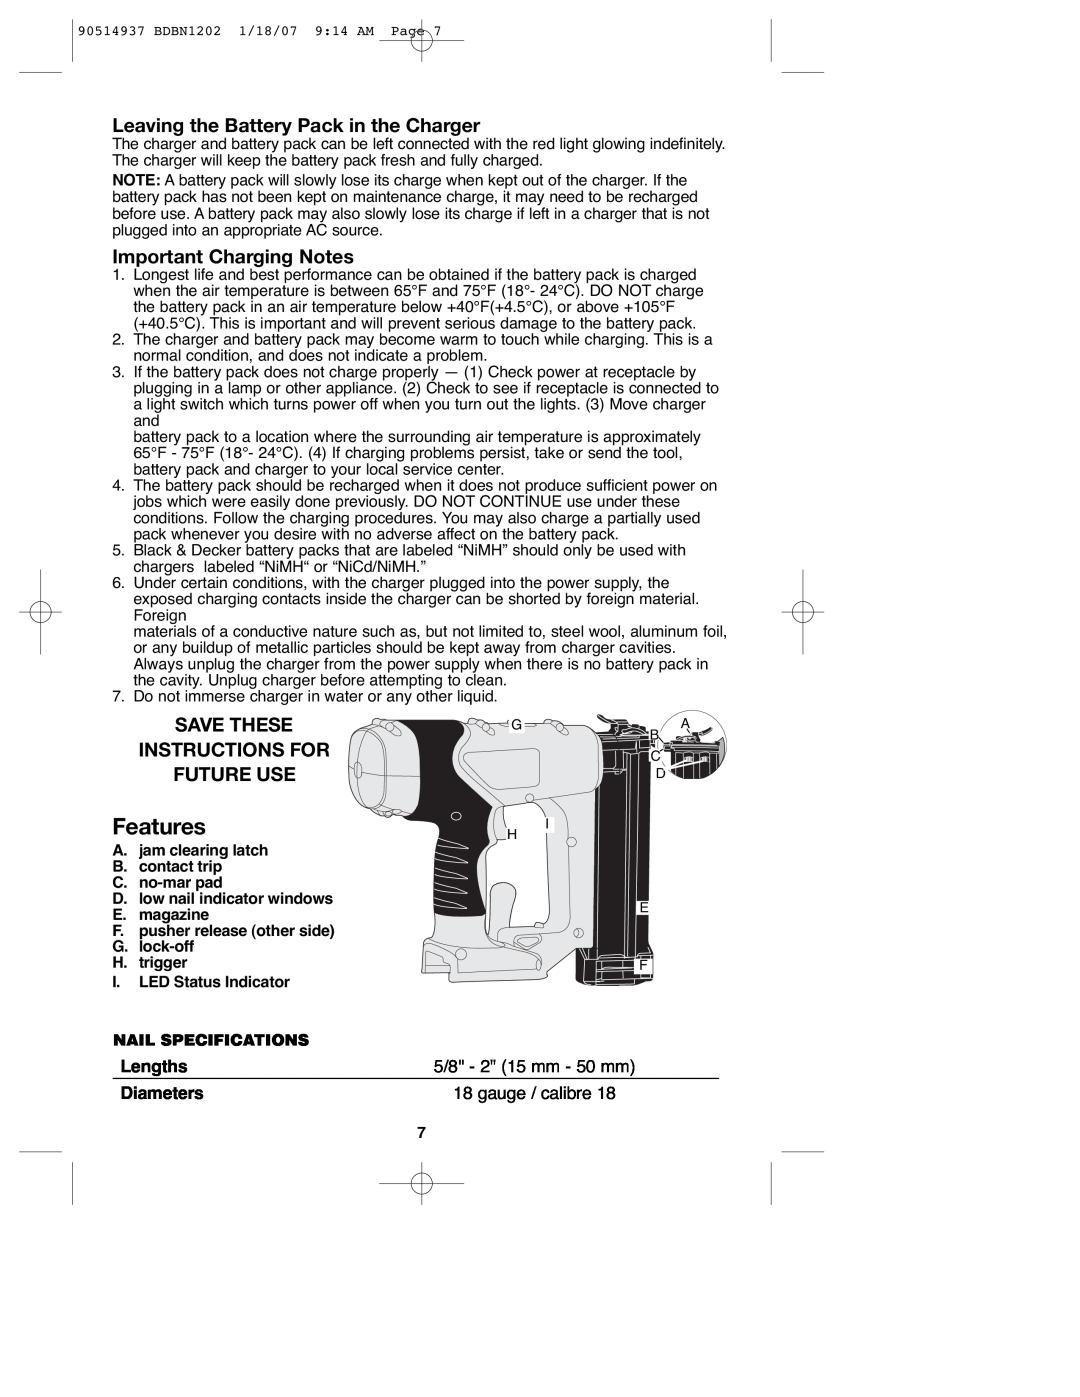 Black & Decker BDBN1802 Features, Leaving the Battery Pack in the Charger, Important Charging Notes, Lengths, Diameters 